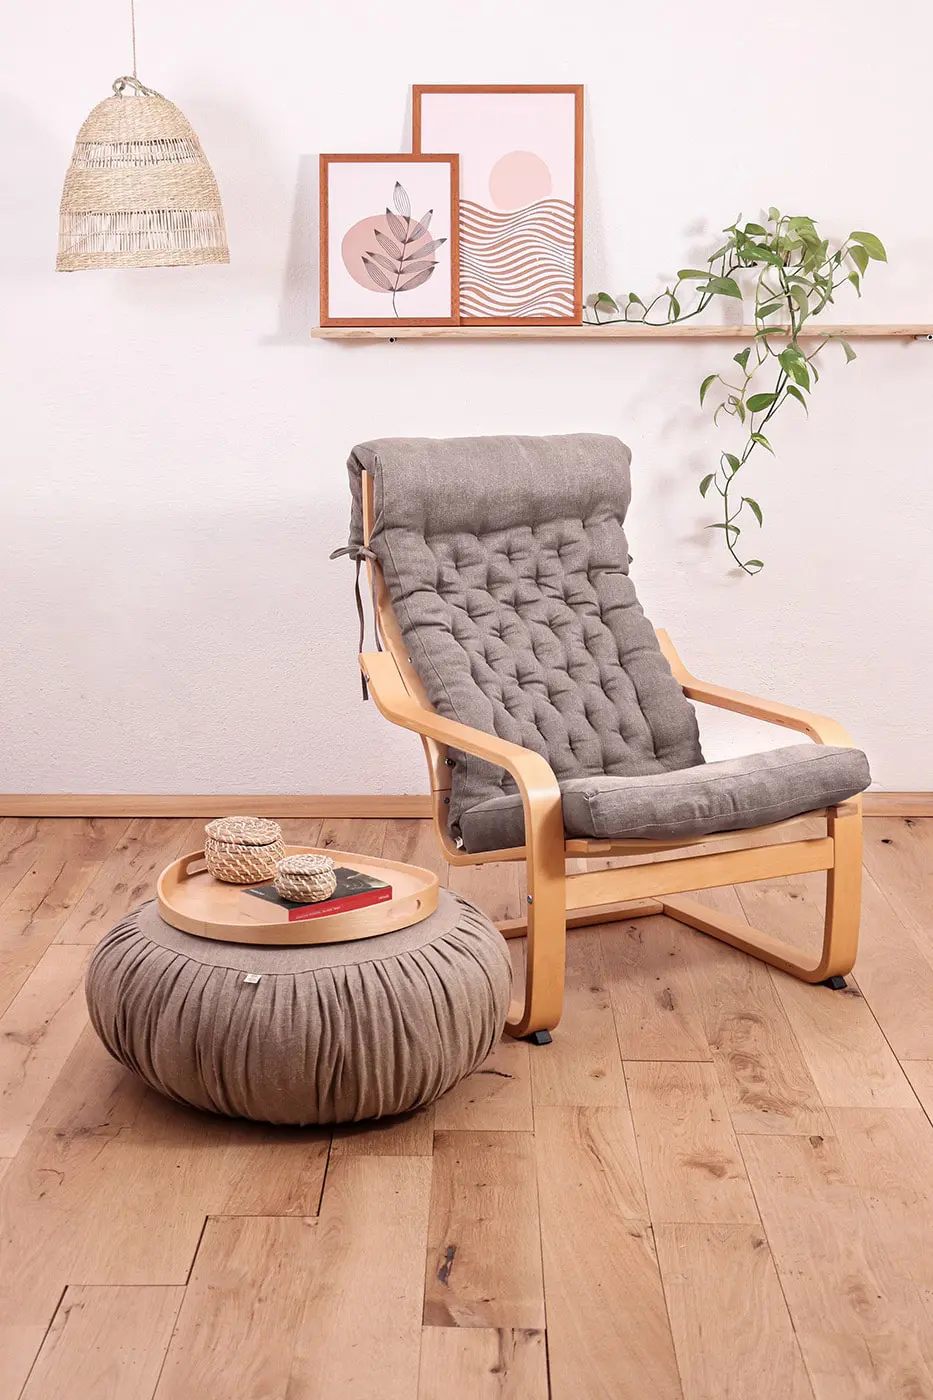 https://homeofwool.com/wp-content/uploads/2021/03/Home-of-Wool-poang-chair-cushion-in-setting.jpg